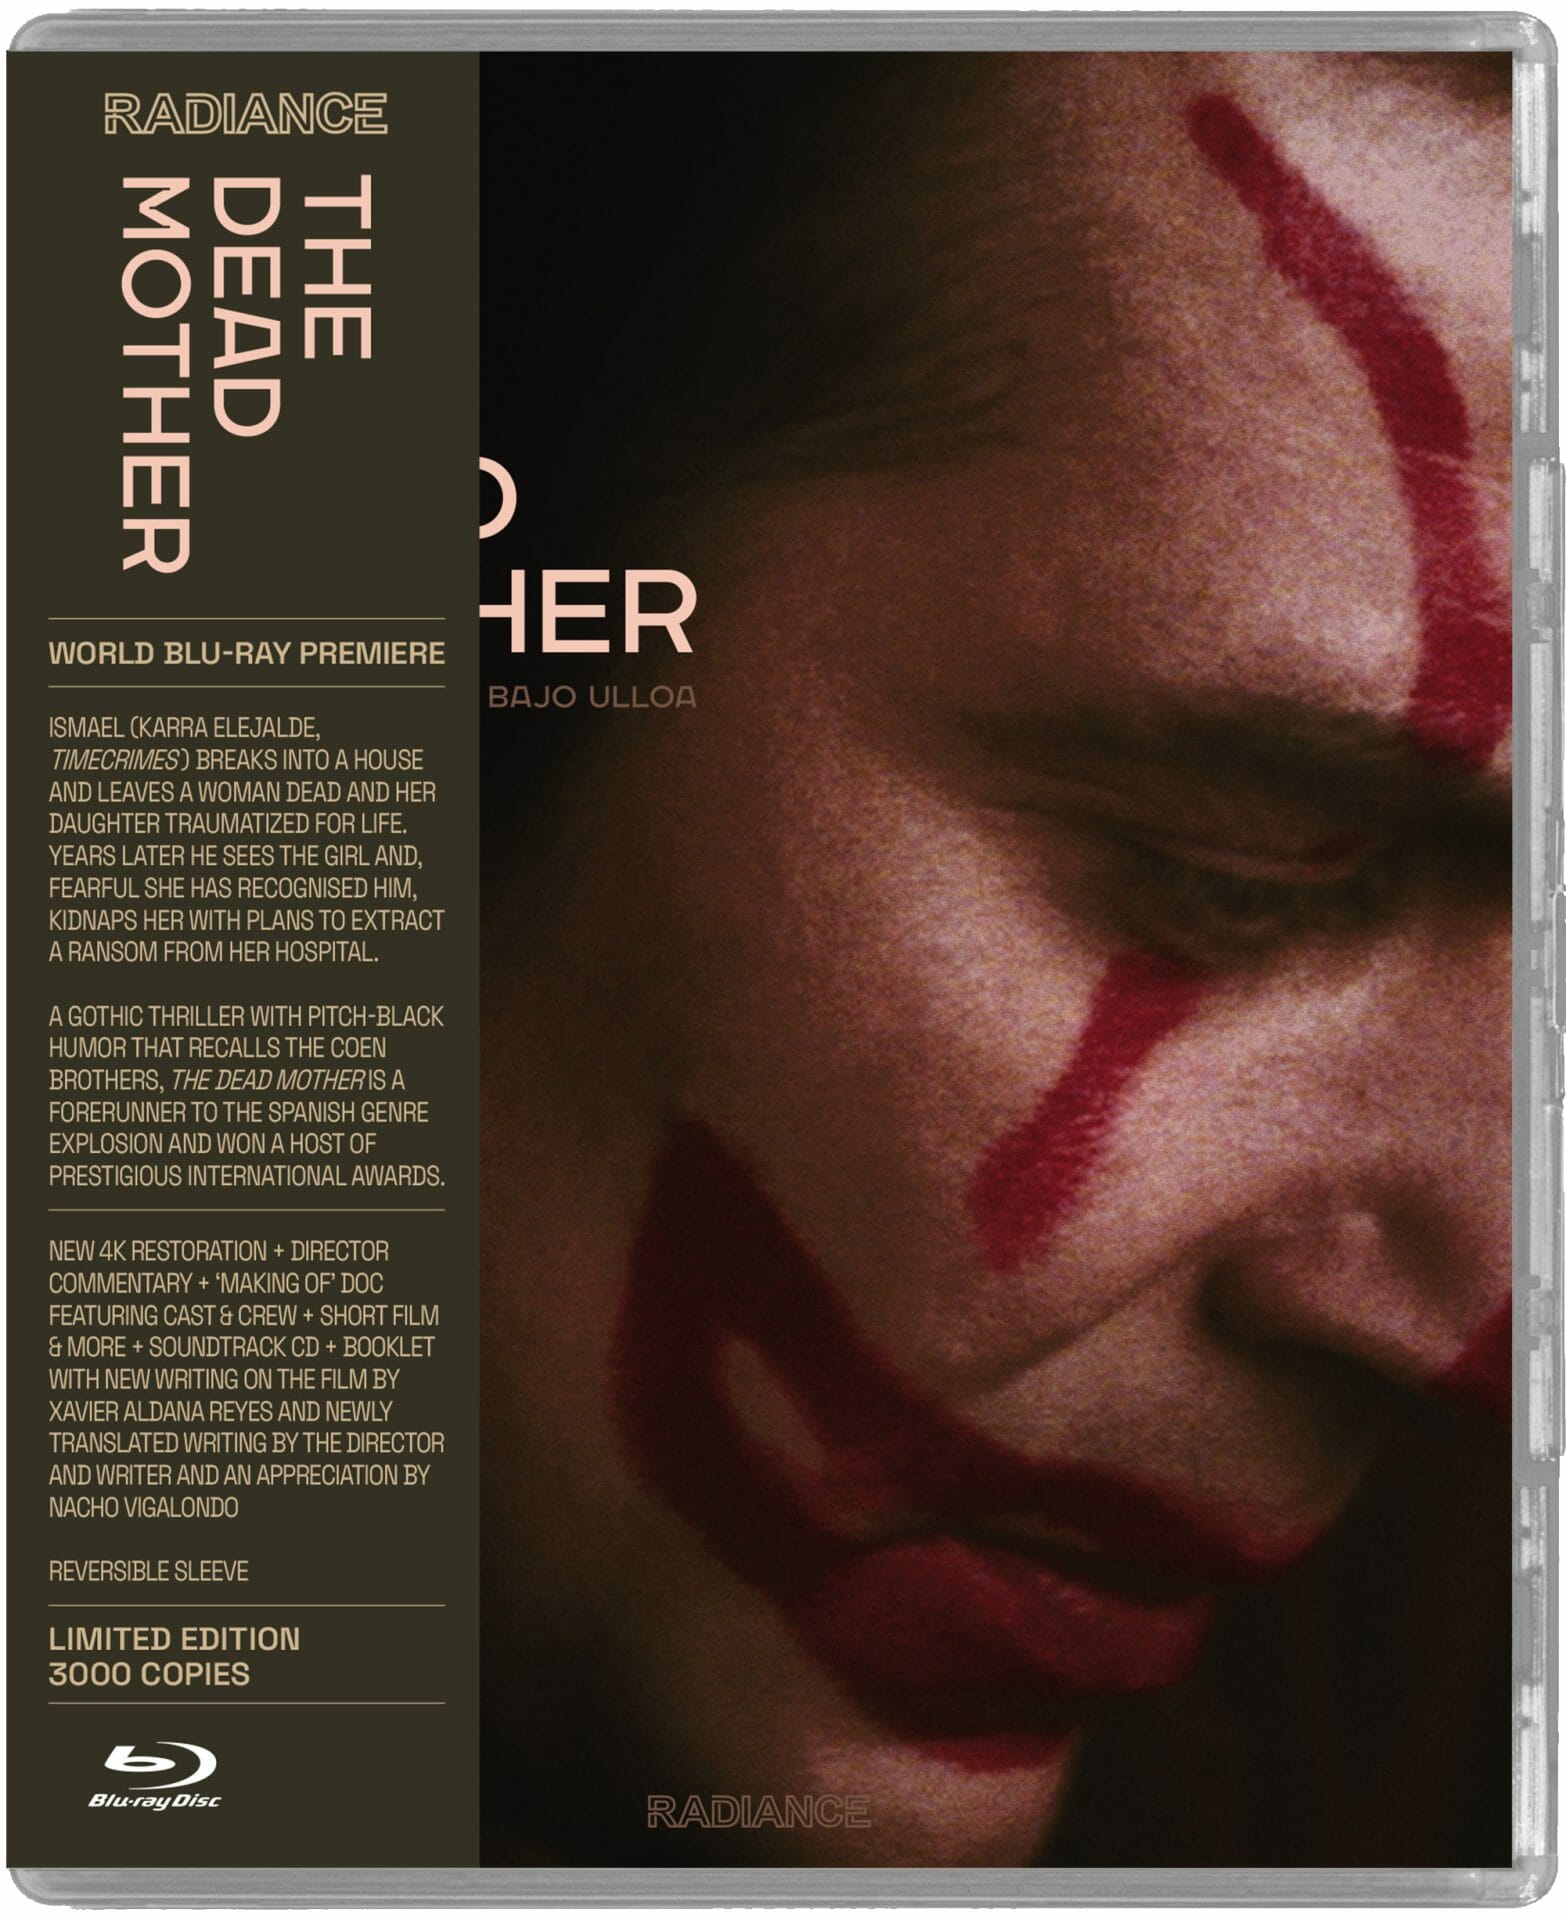 The Dead Mother (LE US Radiance Films) (Blu-Ray) – DiabolikDVD